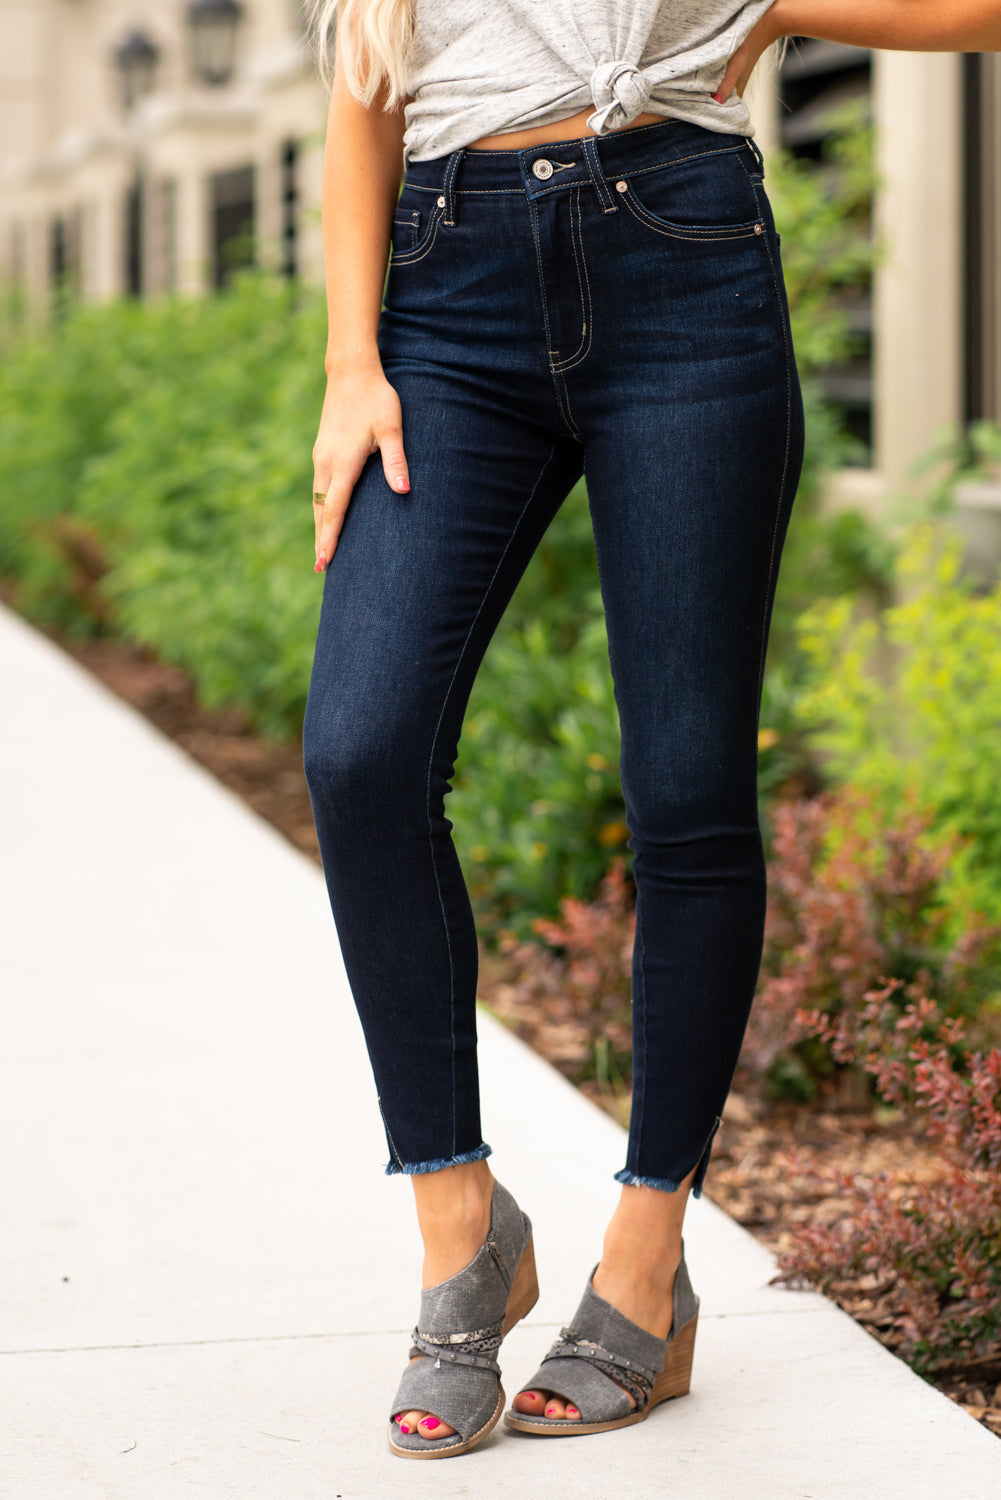 KanCan Jeans These high rise dark wash skinny jeans have a spilt fray hem and fit above the ankles so you can show off you sandals this summer. Color: Dark Blue Cut: Skinny, 27.5" Inseam Rise: High-Rise, 10.5" Front Rise COTTON 71% POLYESTER 27% SPANDEX 2% Stitching: Classic Fly: Zipper Style #: KC8604D Contact us for any additional measurements or sizing.  Cas is 5'7", wears a size 25 jeans, small top and 8 shoe. She is wearing a size 25/3 in these jeans. 